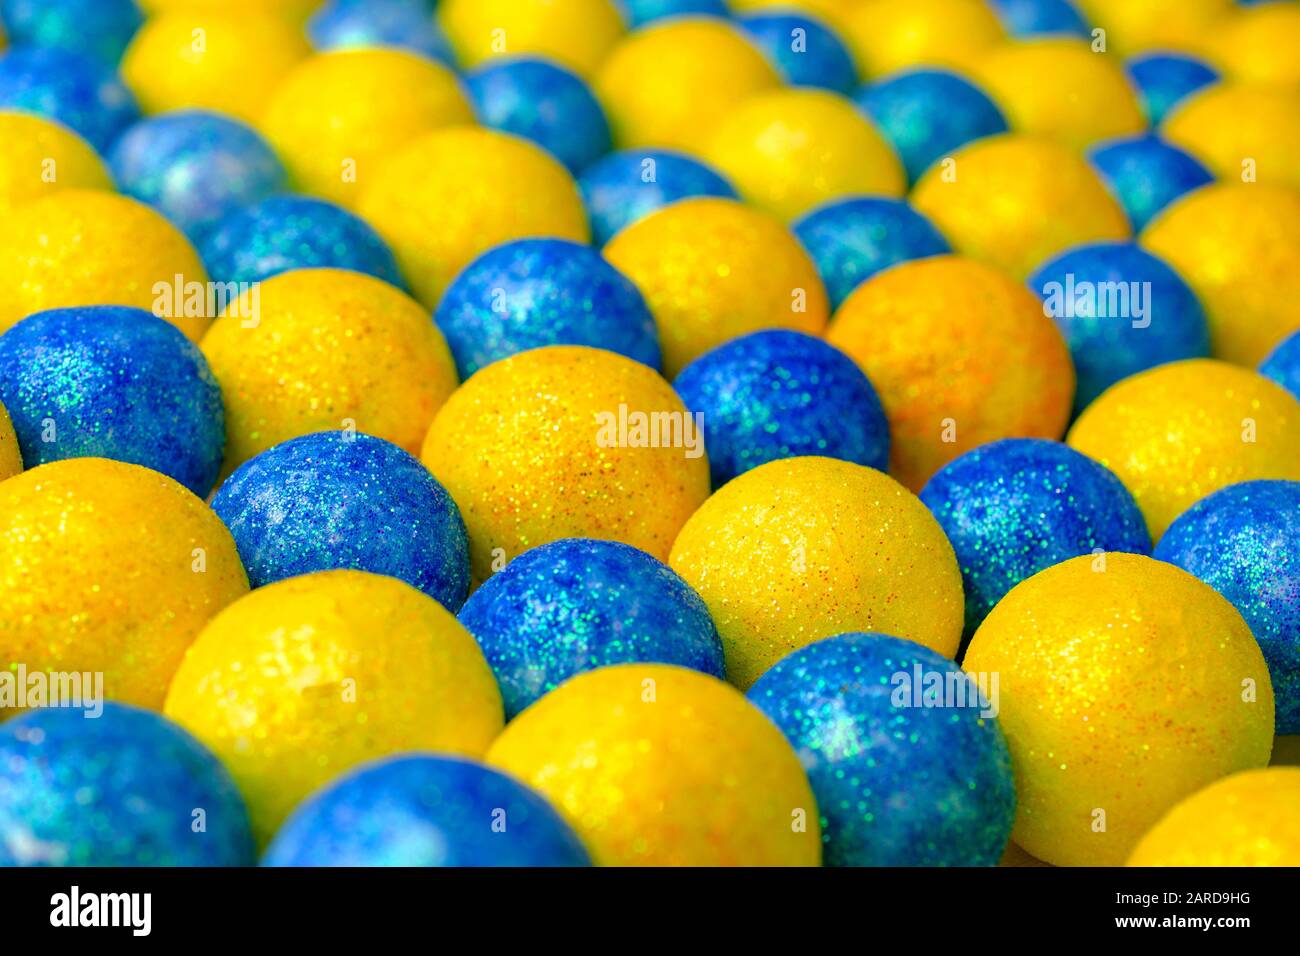 Yellow Ball Images – Browse 595,954 Stock Photos, Vectors, and